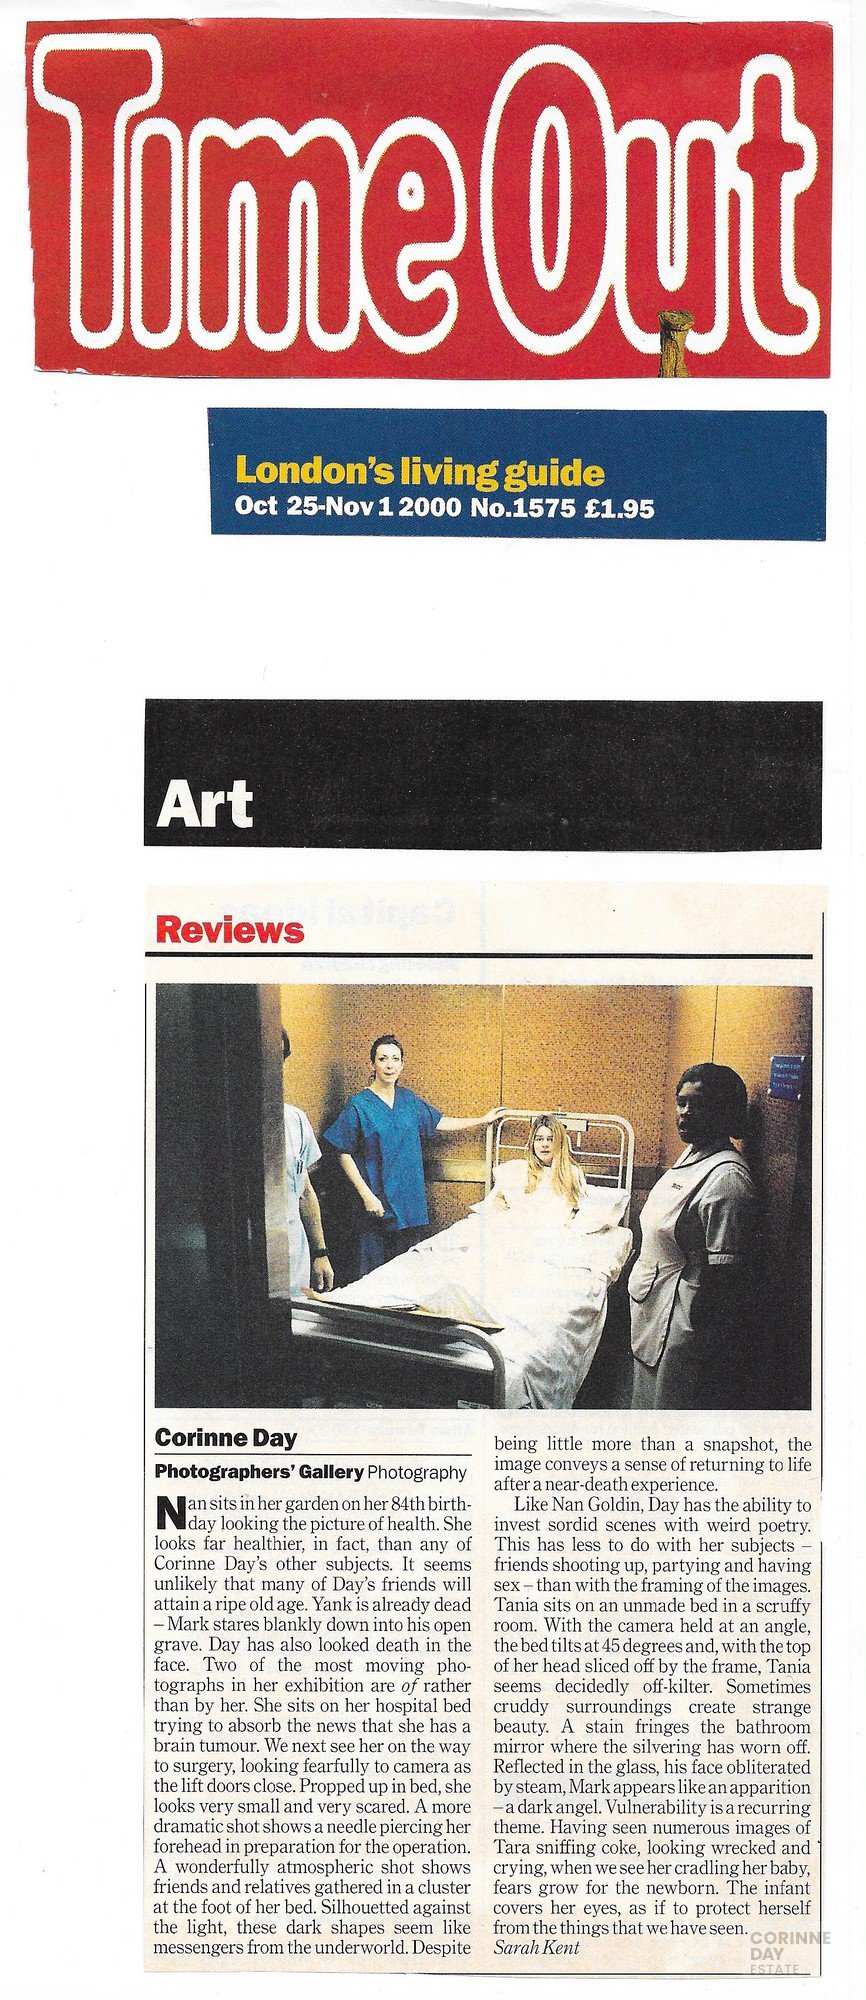 Corinne Day Photographers Gallery, Time Out Art Review, Oct 2000 — Image 1 of 1